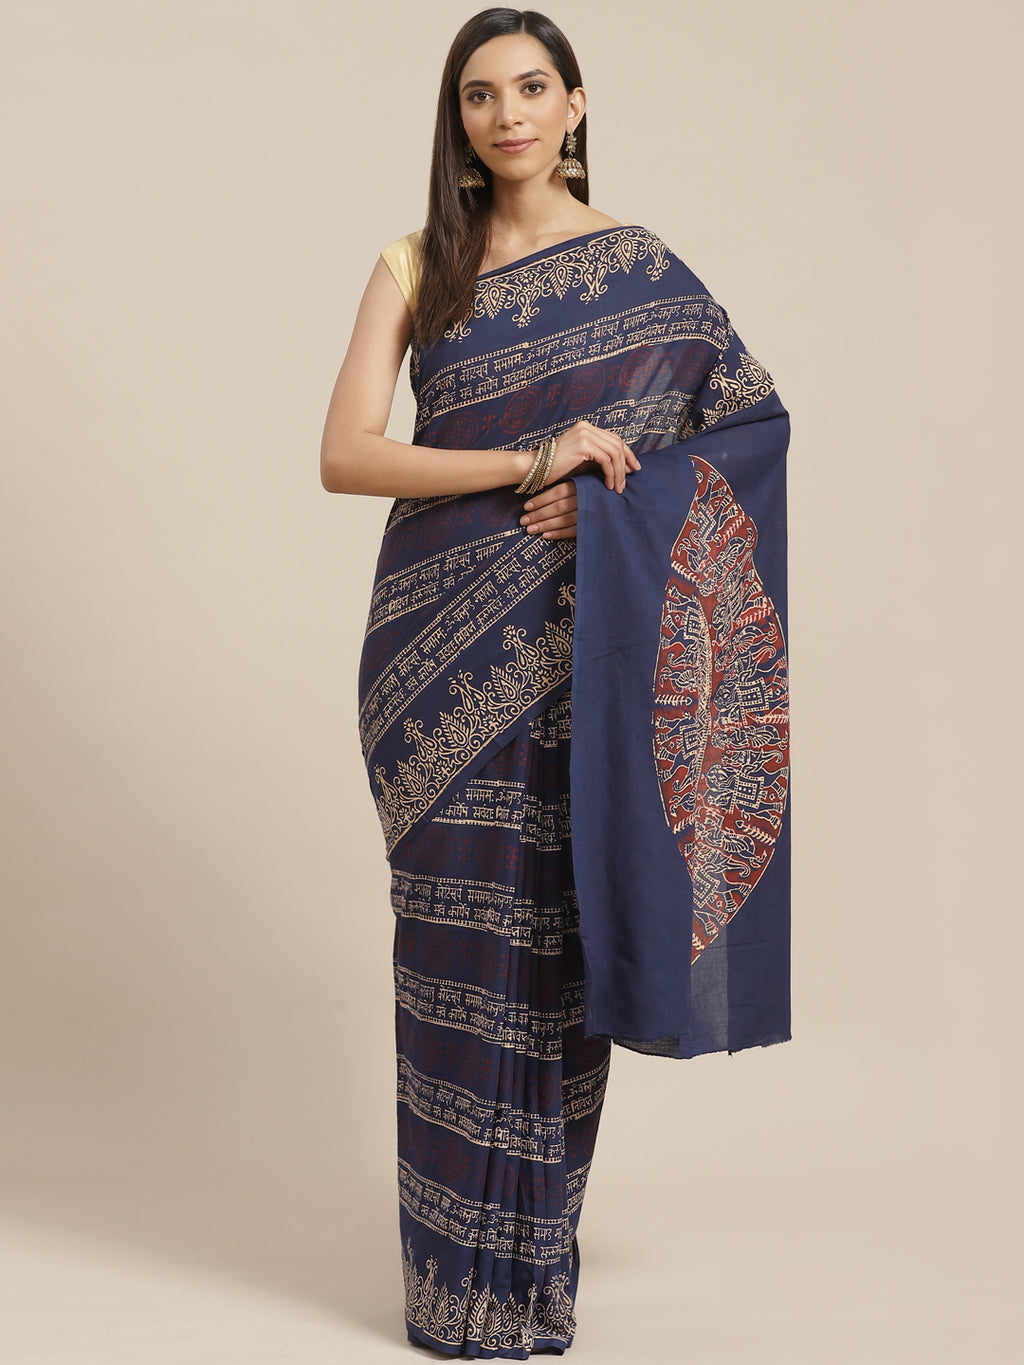 Blue and Red, Kalakari India Pure Cotton Handblock Printed Saree and Blouse RCBGSA0024-Saree-Kalakari India-RCBGSA0024-Cotton, Geographical Indication, Hand Block, Hand Crafted, Heritage Prints, Natural Dyes, Red, Sarees, Sustainable Fabrics, Woven, Yellow-[Linen,Ethnic,wear,Fashionista,Handloom,Handicraft,Indigo,blockprint,block,print,Cotton,Chanderi,Blue, latest,classy,party,bollywood,trendy,summer,style,traditional,formal,elegant,unique,style,hand,block,print, dabu,booti,gift,present,glamorou